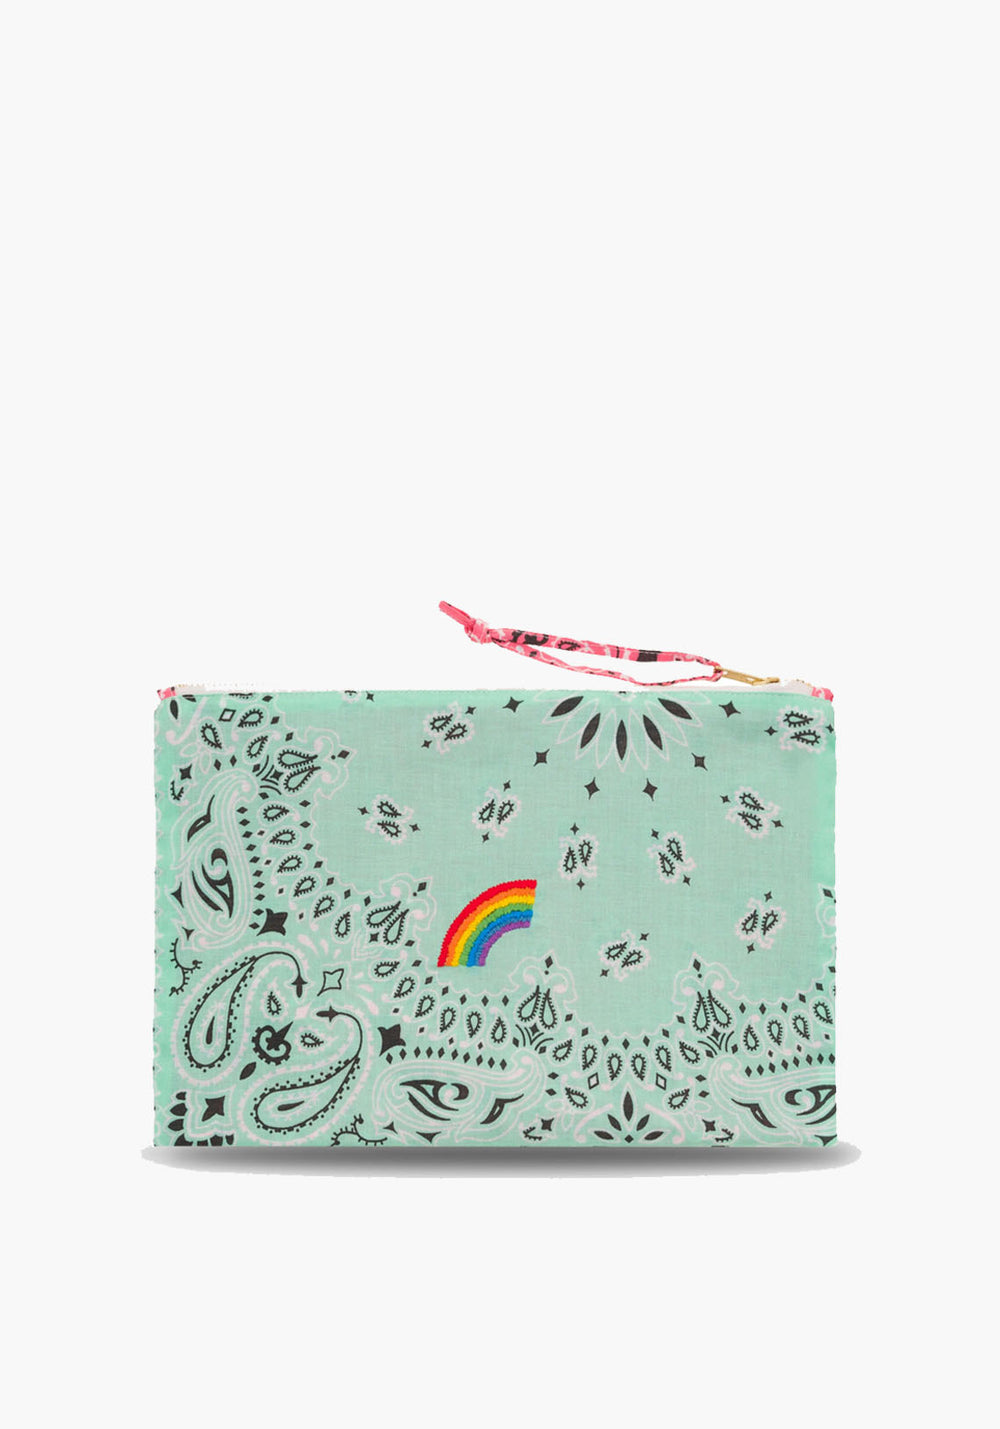 ZIPPED POUCH QUILTED ARC EN CIEL MINT STRAWBERRY